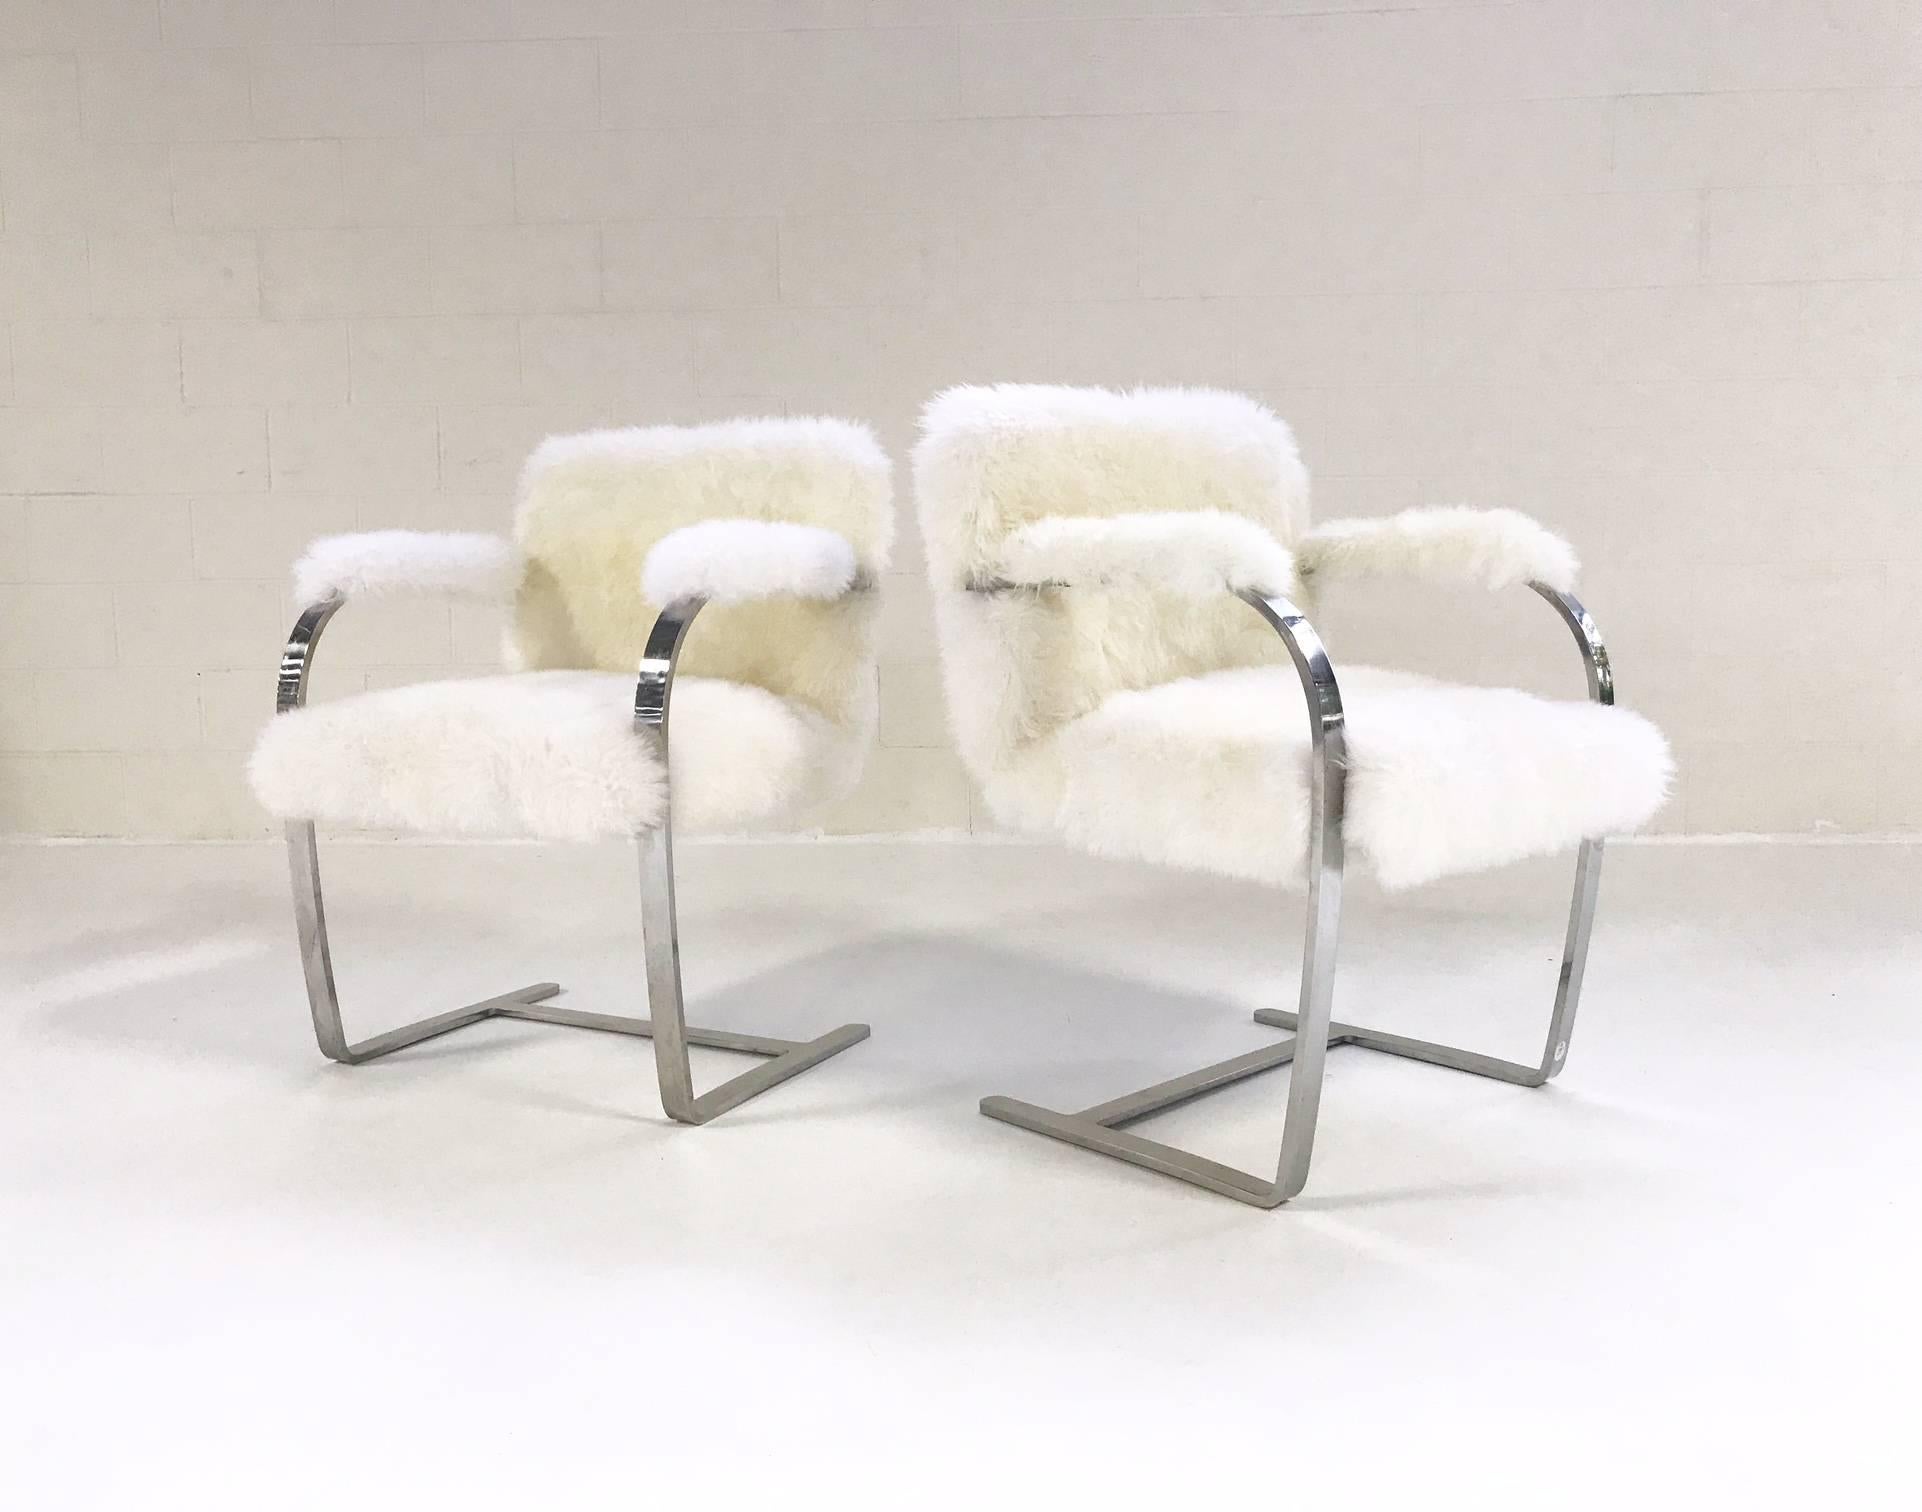 Mid-Century Modern Mies Van Der Rohe Brno Chairs for Knoll in New Zealand Sheepskin - Pair